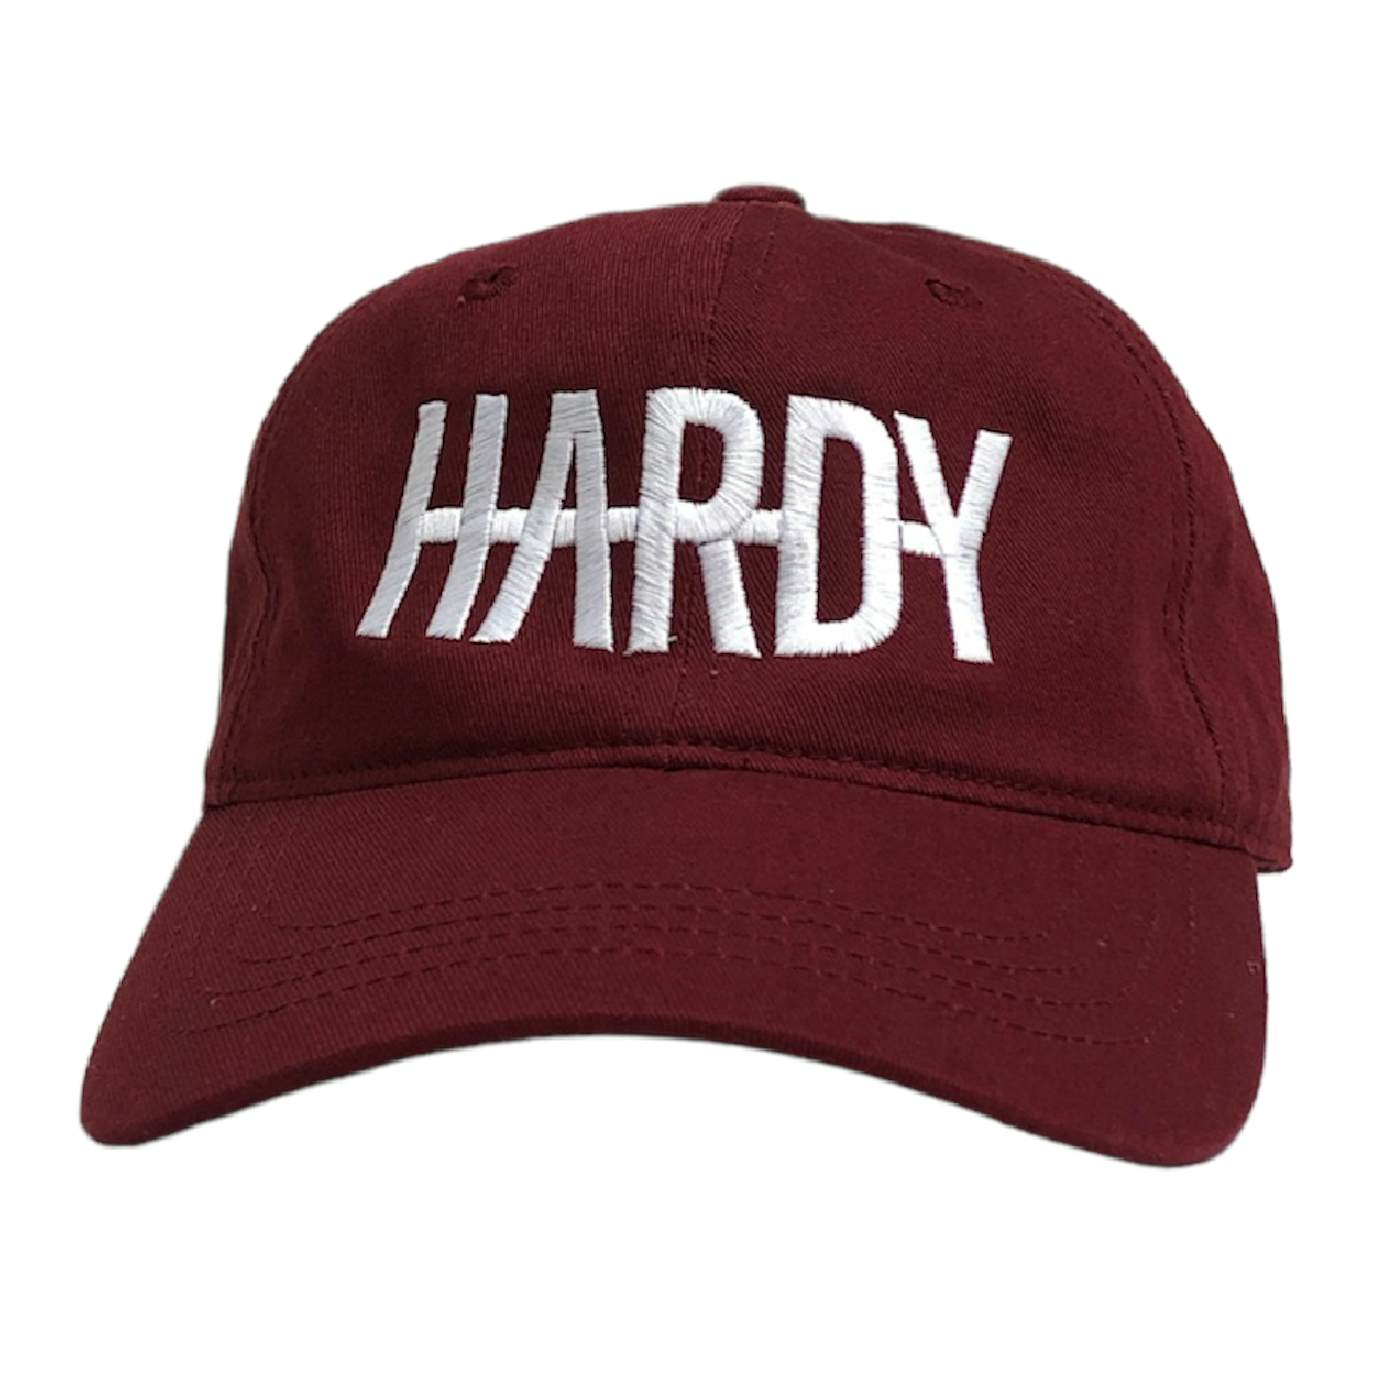 HARDY Burgundy Sold Out Ballcap